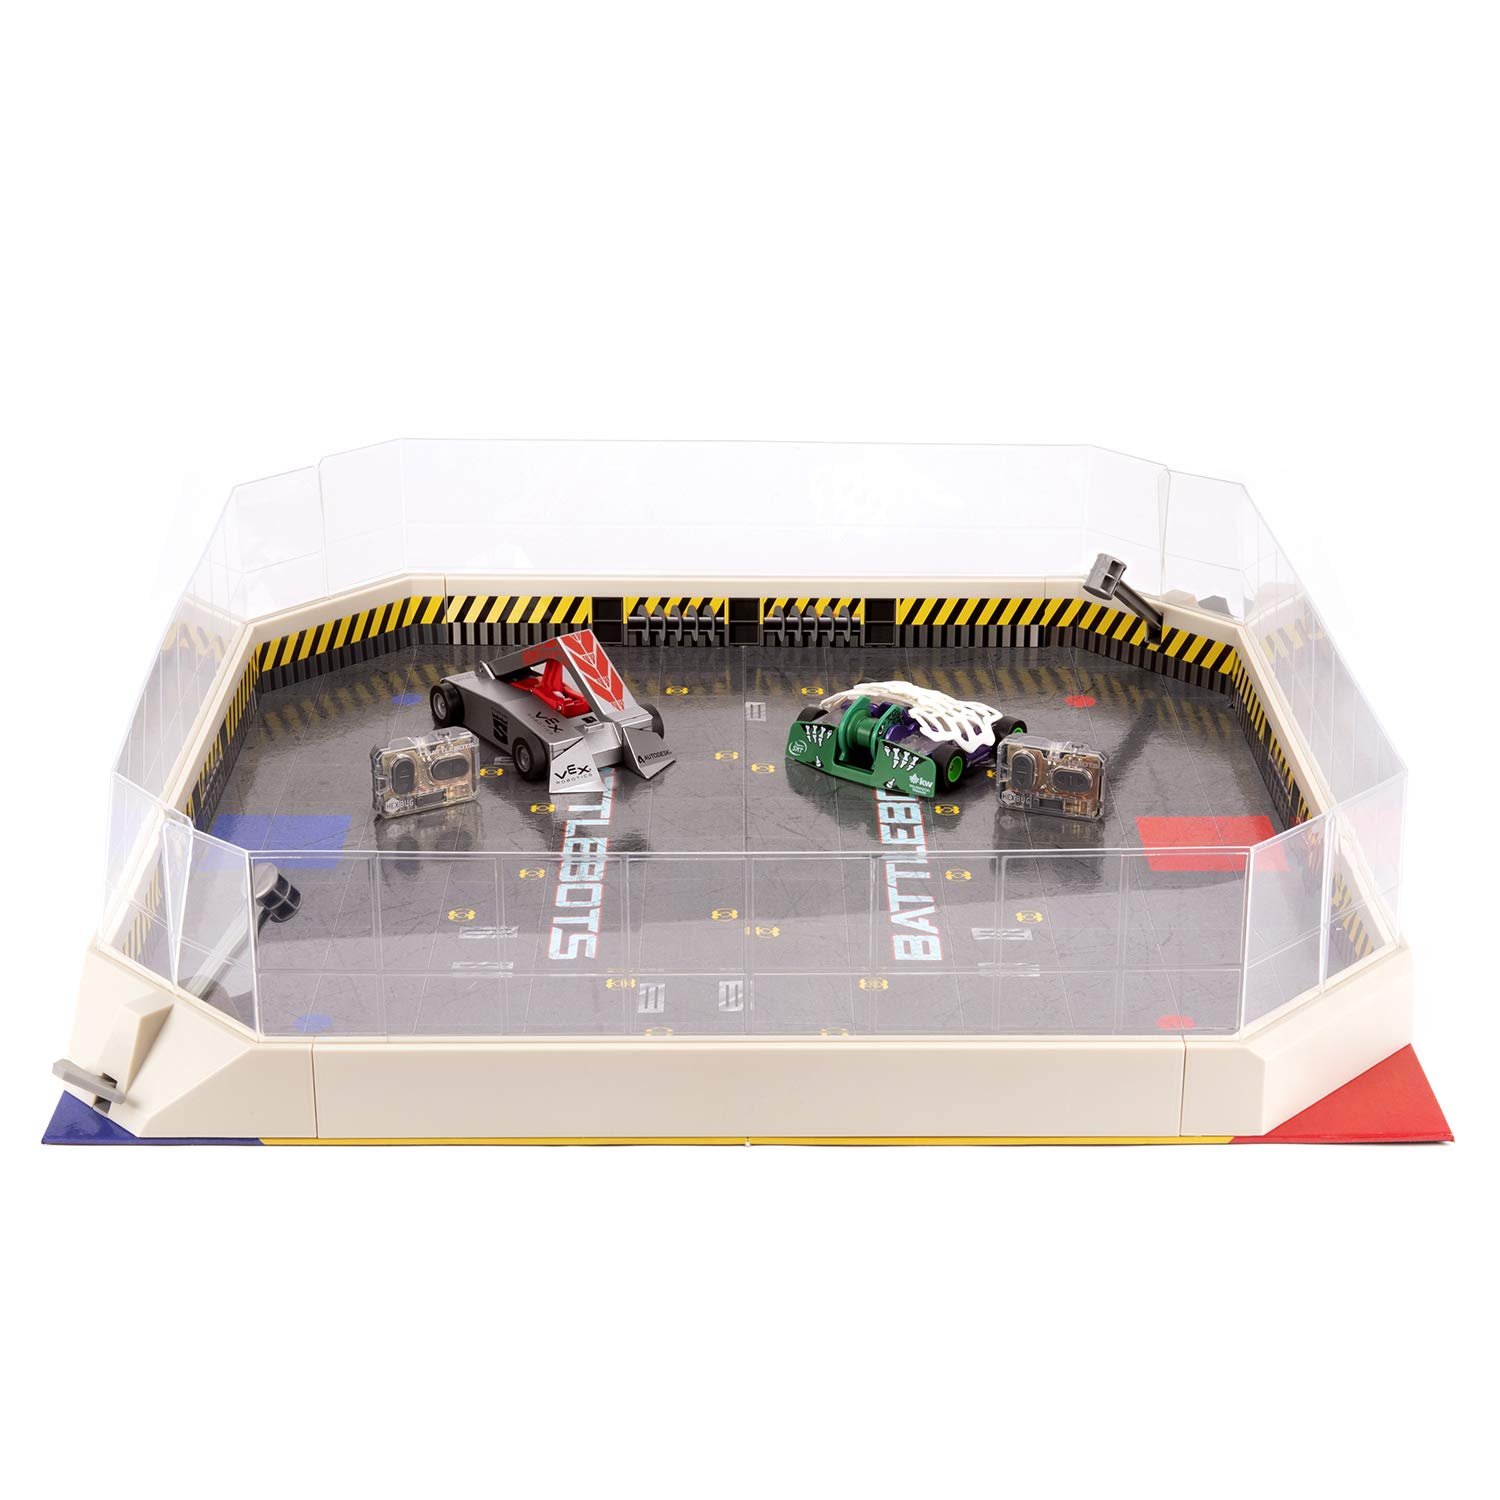 HEXBUG BattleBots Arena Bronco & Witch Doctor - Battle Bot with Game Board and Accessories - Remote Controlled Toy for Kids - Batteries Included with Hex Bug Robot Playset